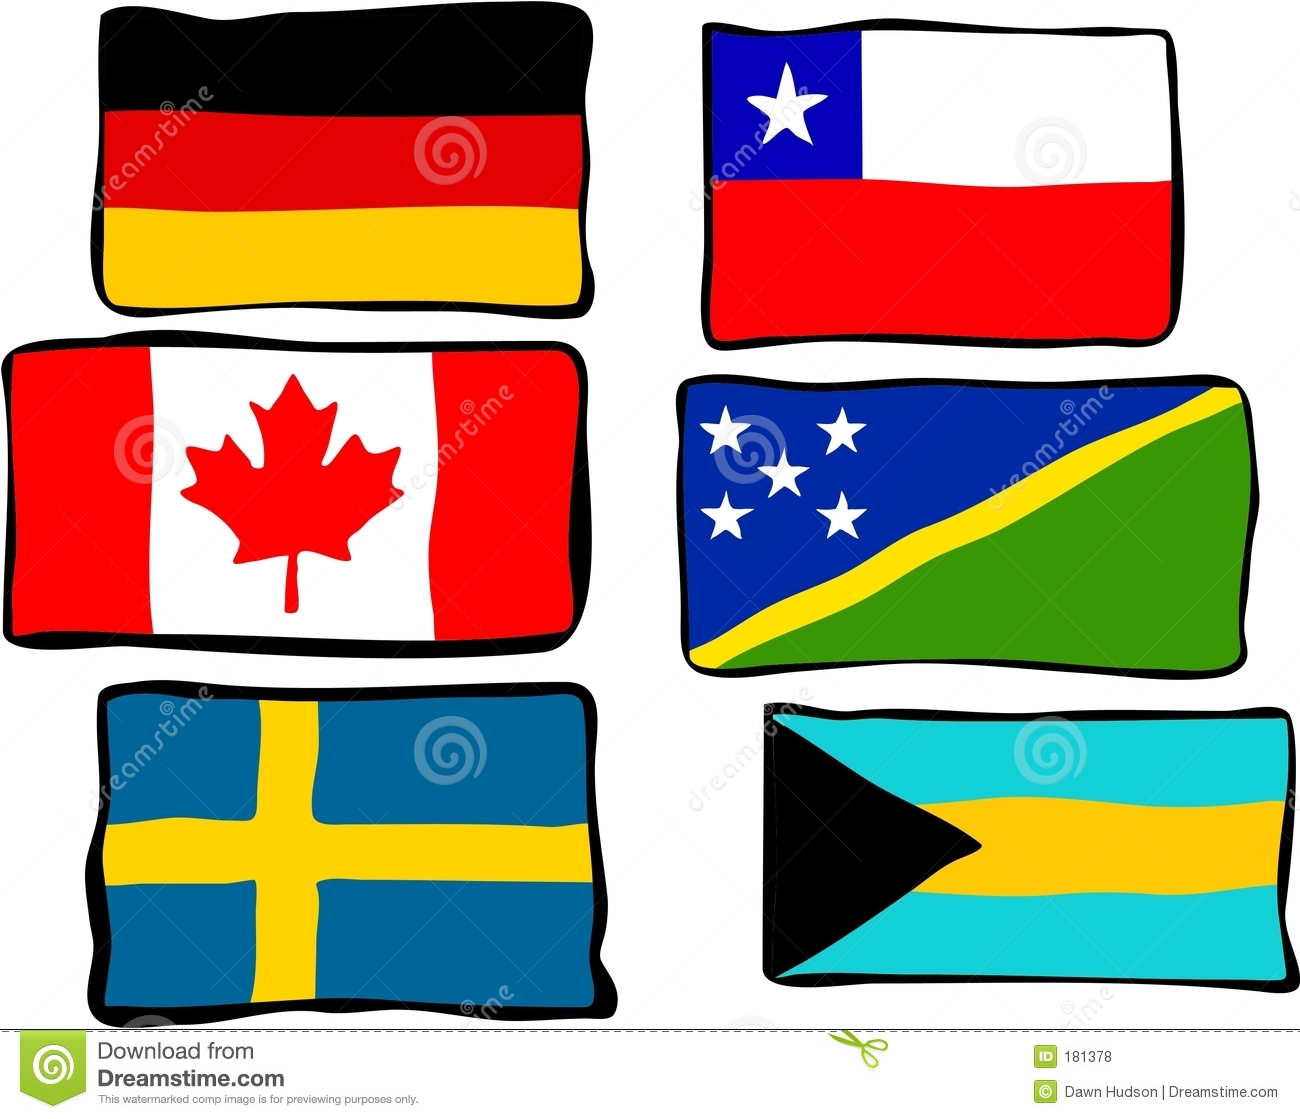 free clipart images flags - photo #49